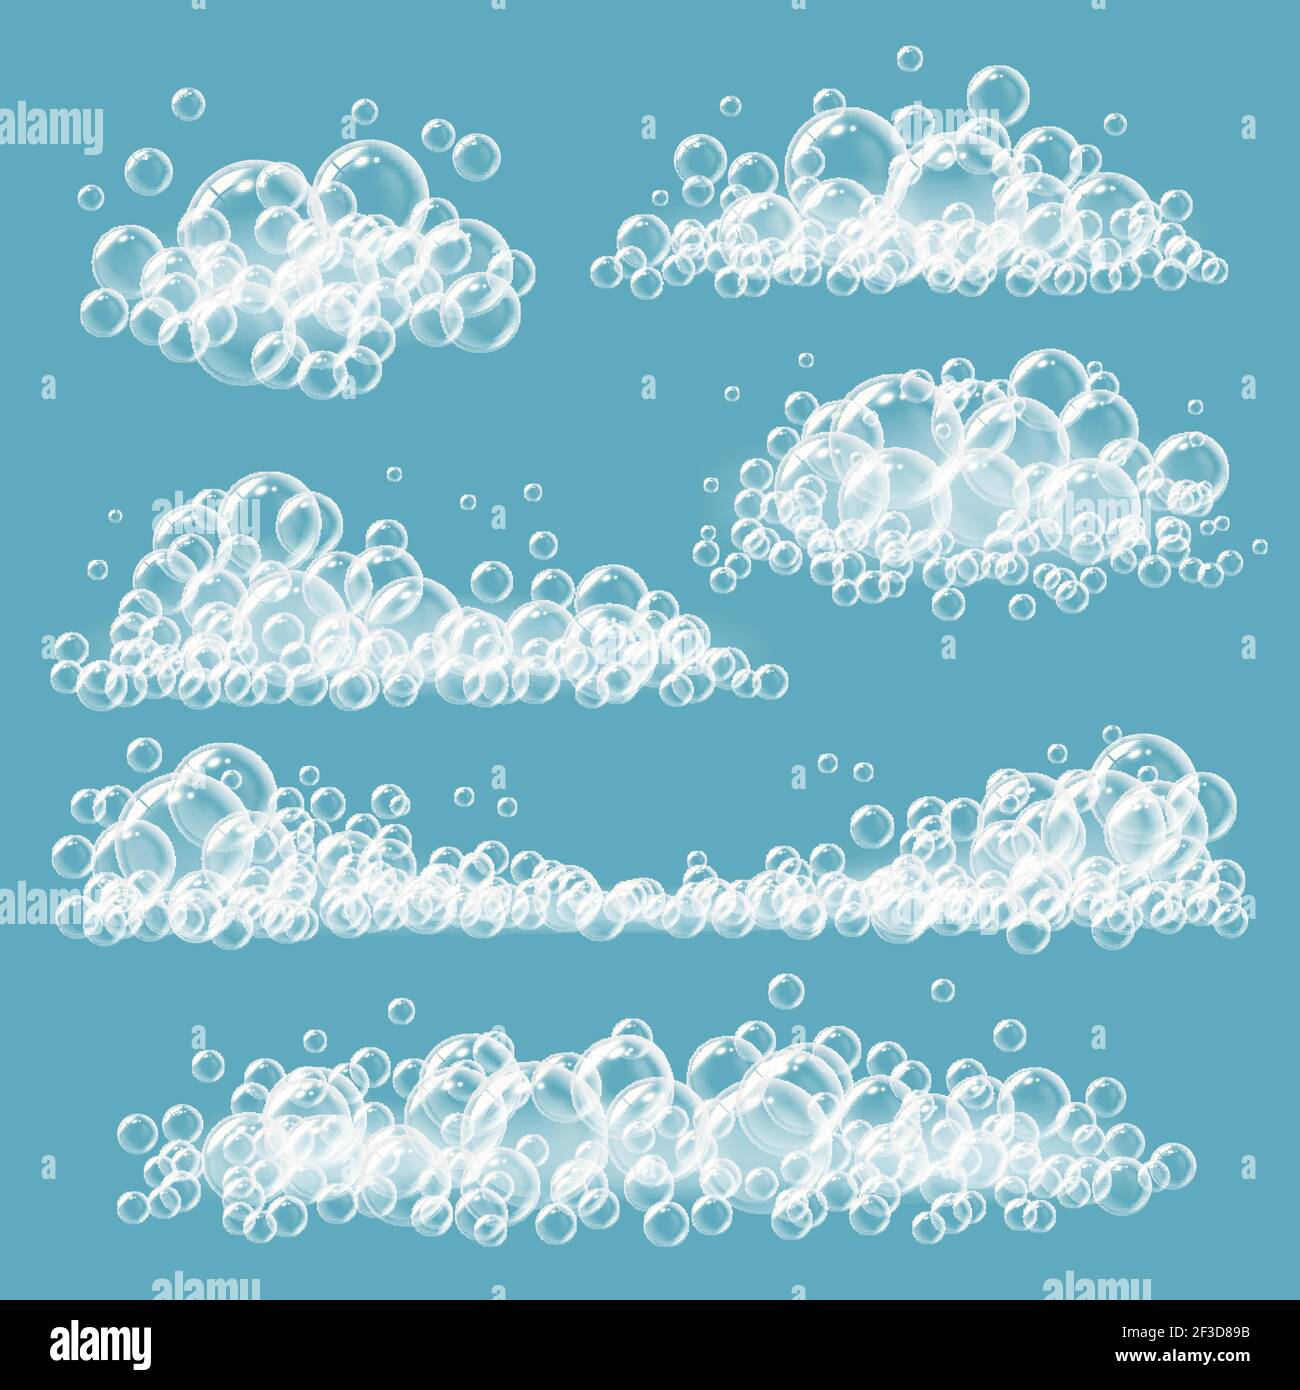 Foaming bubbles. Soapy transparent circles and balls white realistic vector foam templates Stock Vector